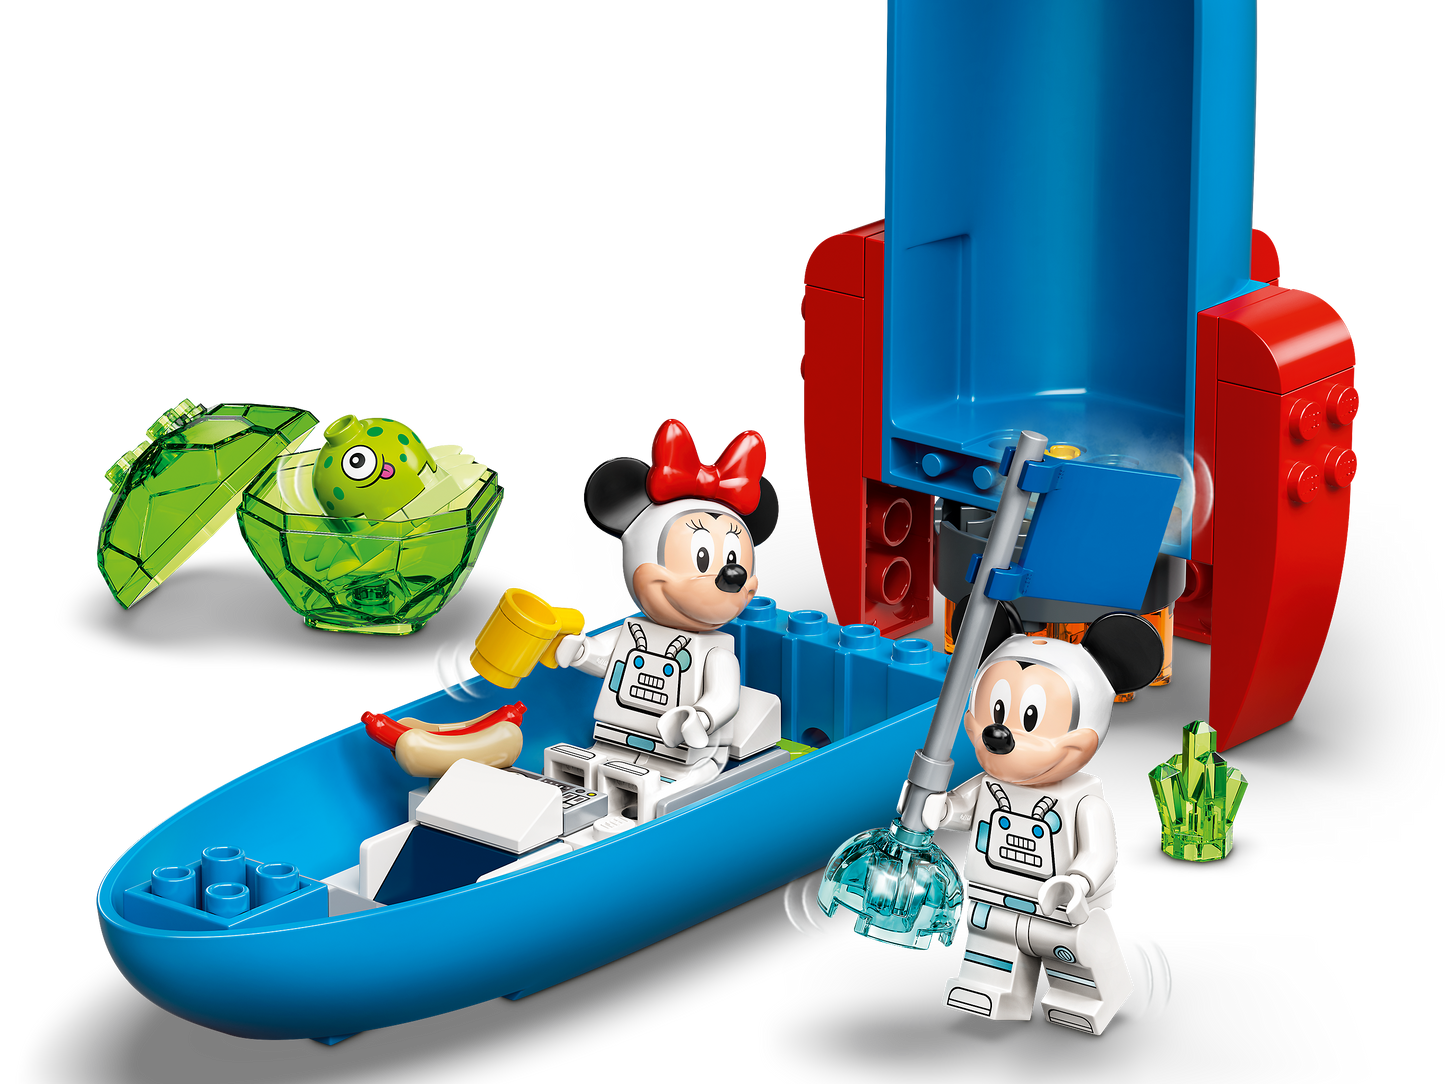 Mickey Mouse & Minnie Mouse's Space Rocket